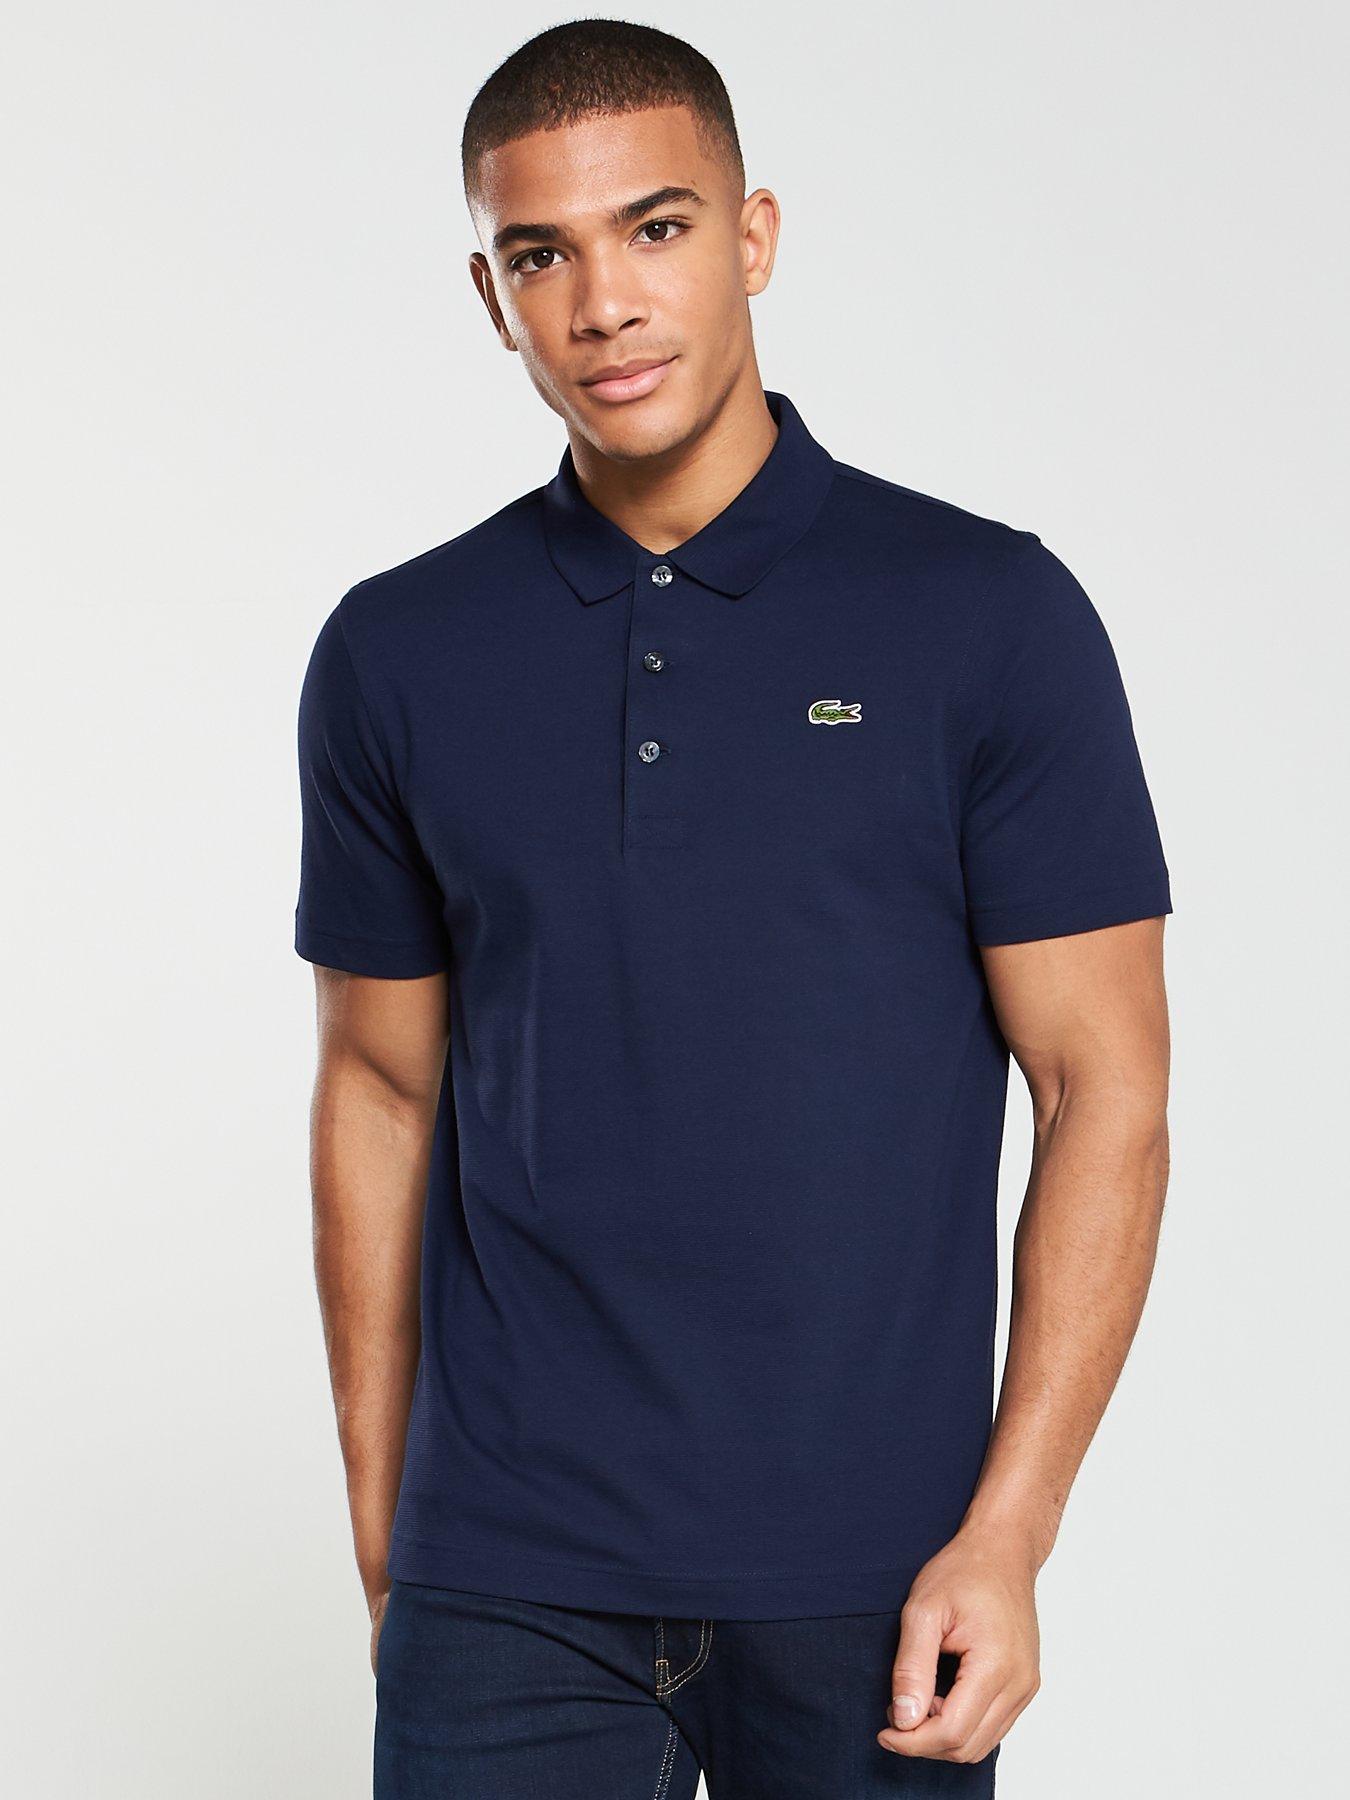 navy lacoste shirt